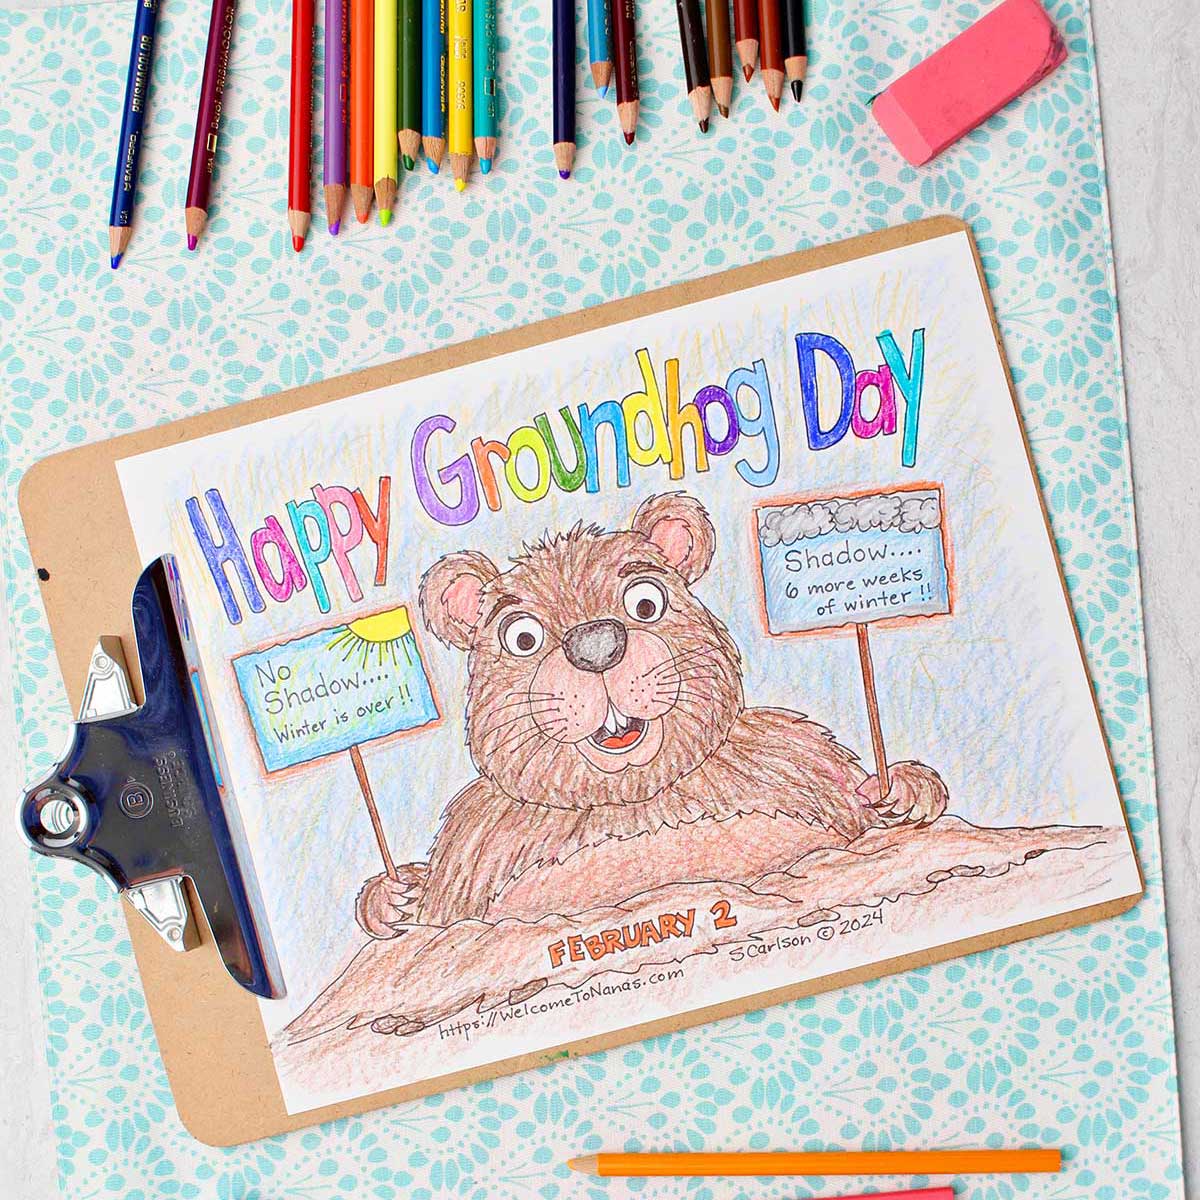 Completed Groundhog Day Coloring Page with colored pencils and pencil sharpener near by.